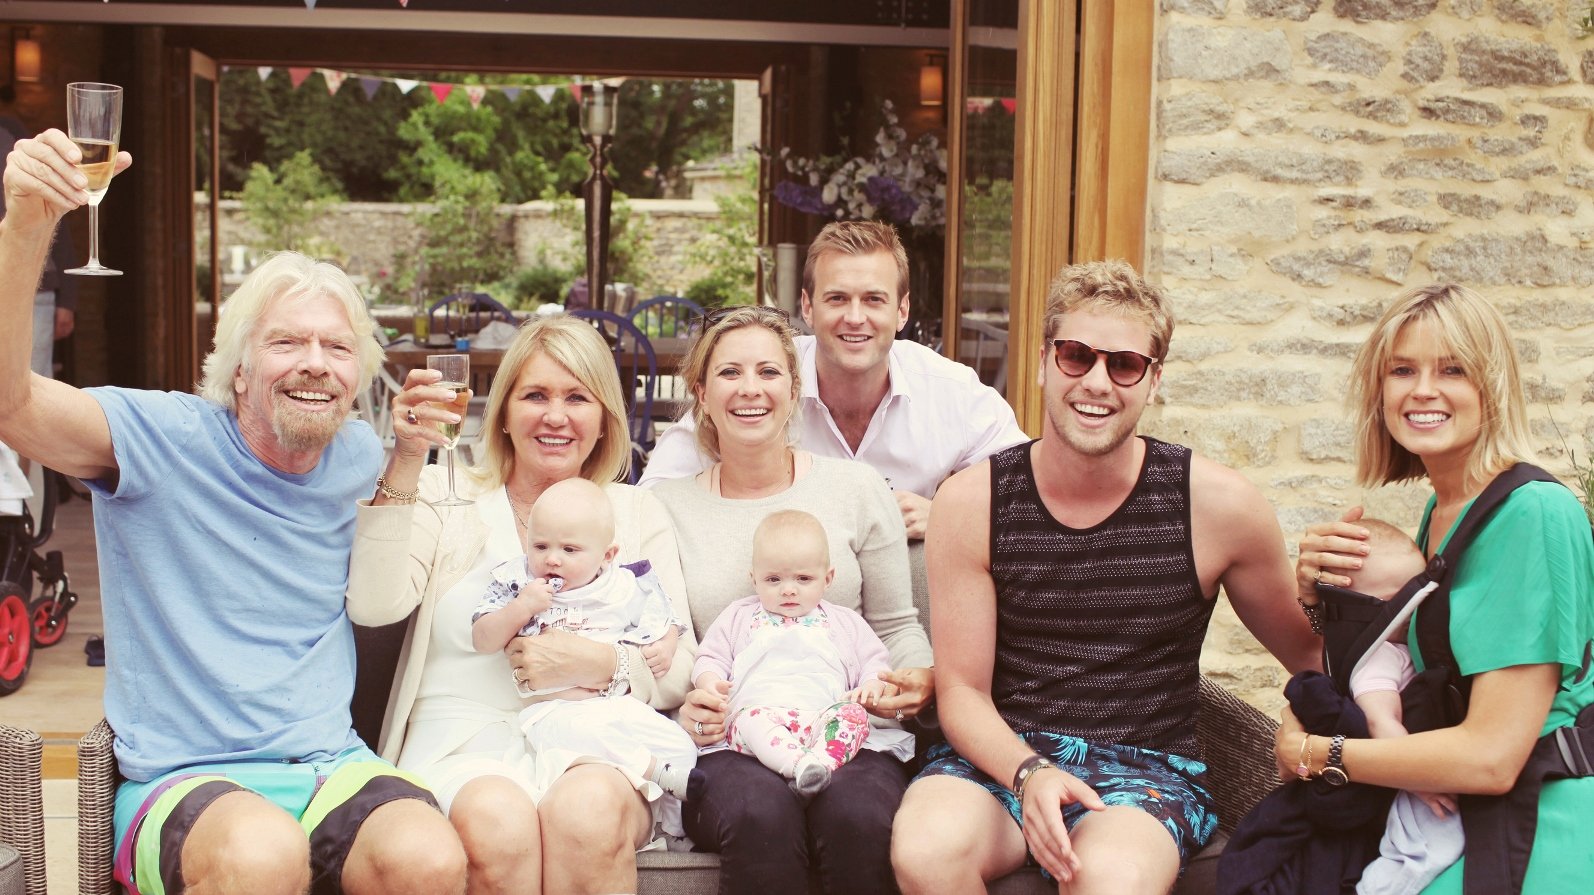 Richard Branson with family.